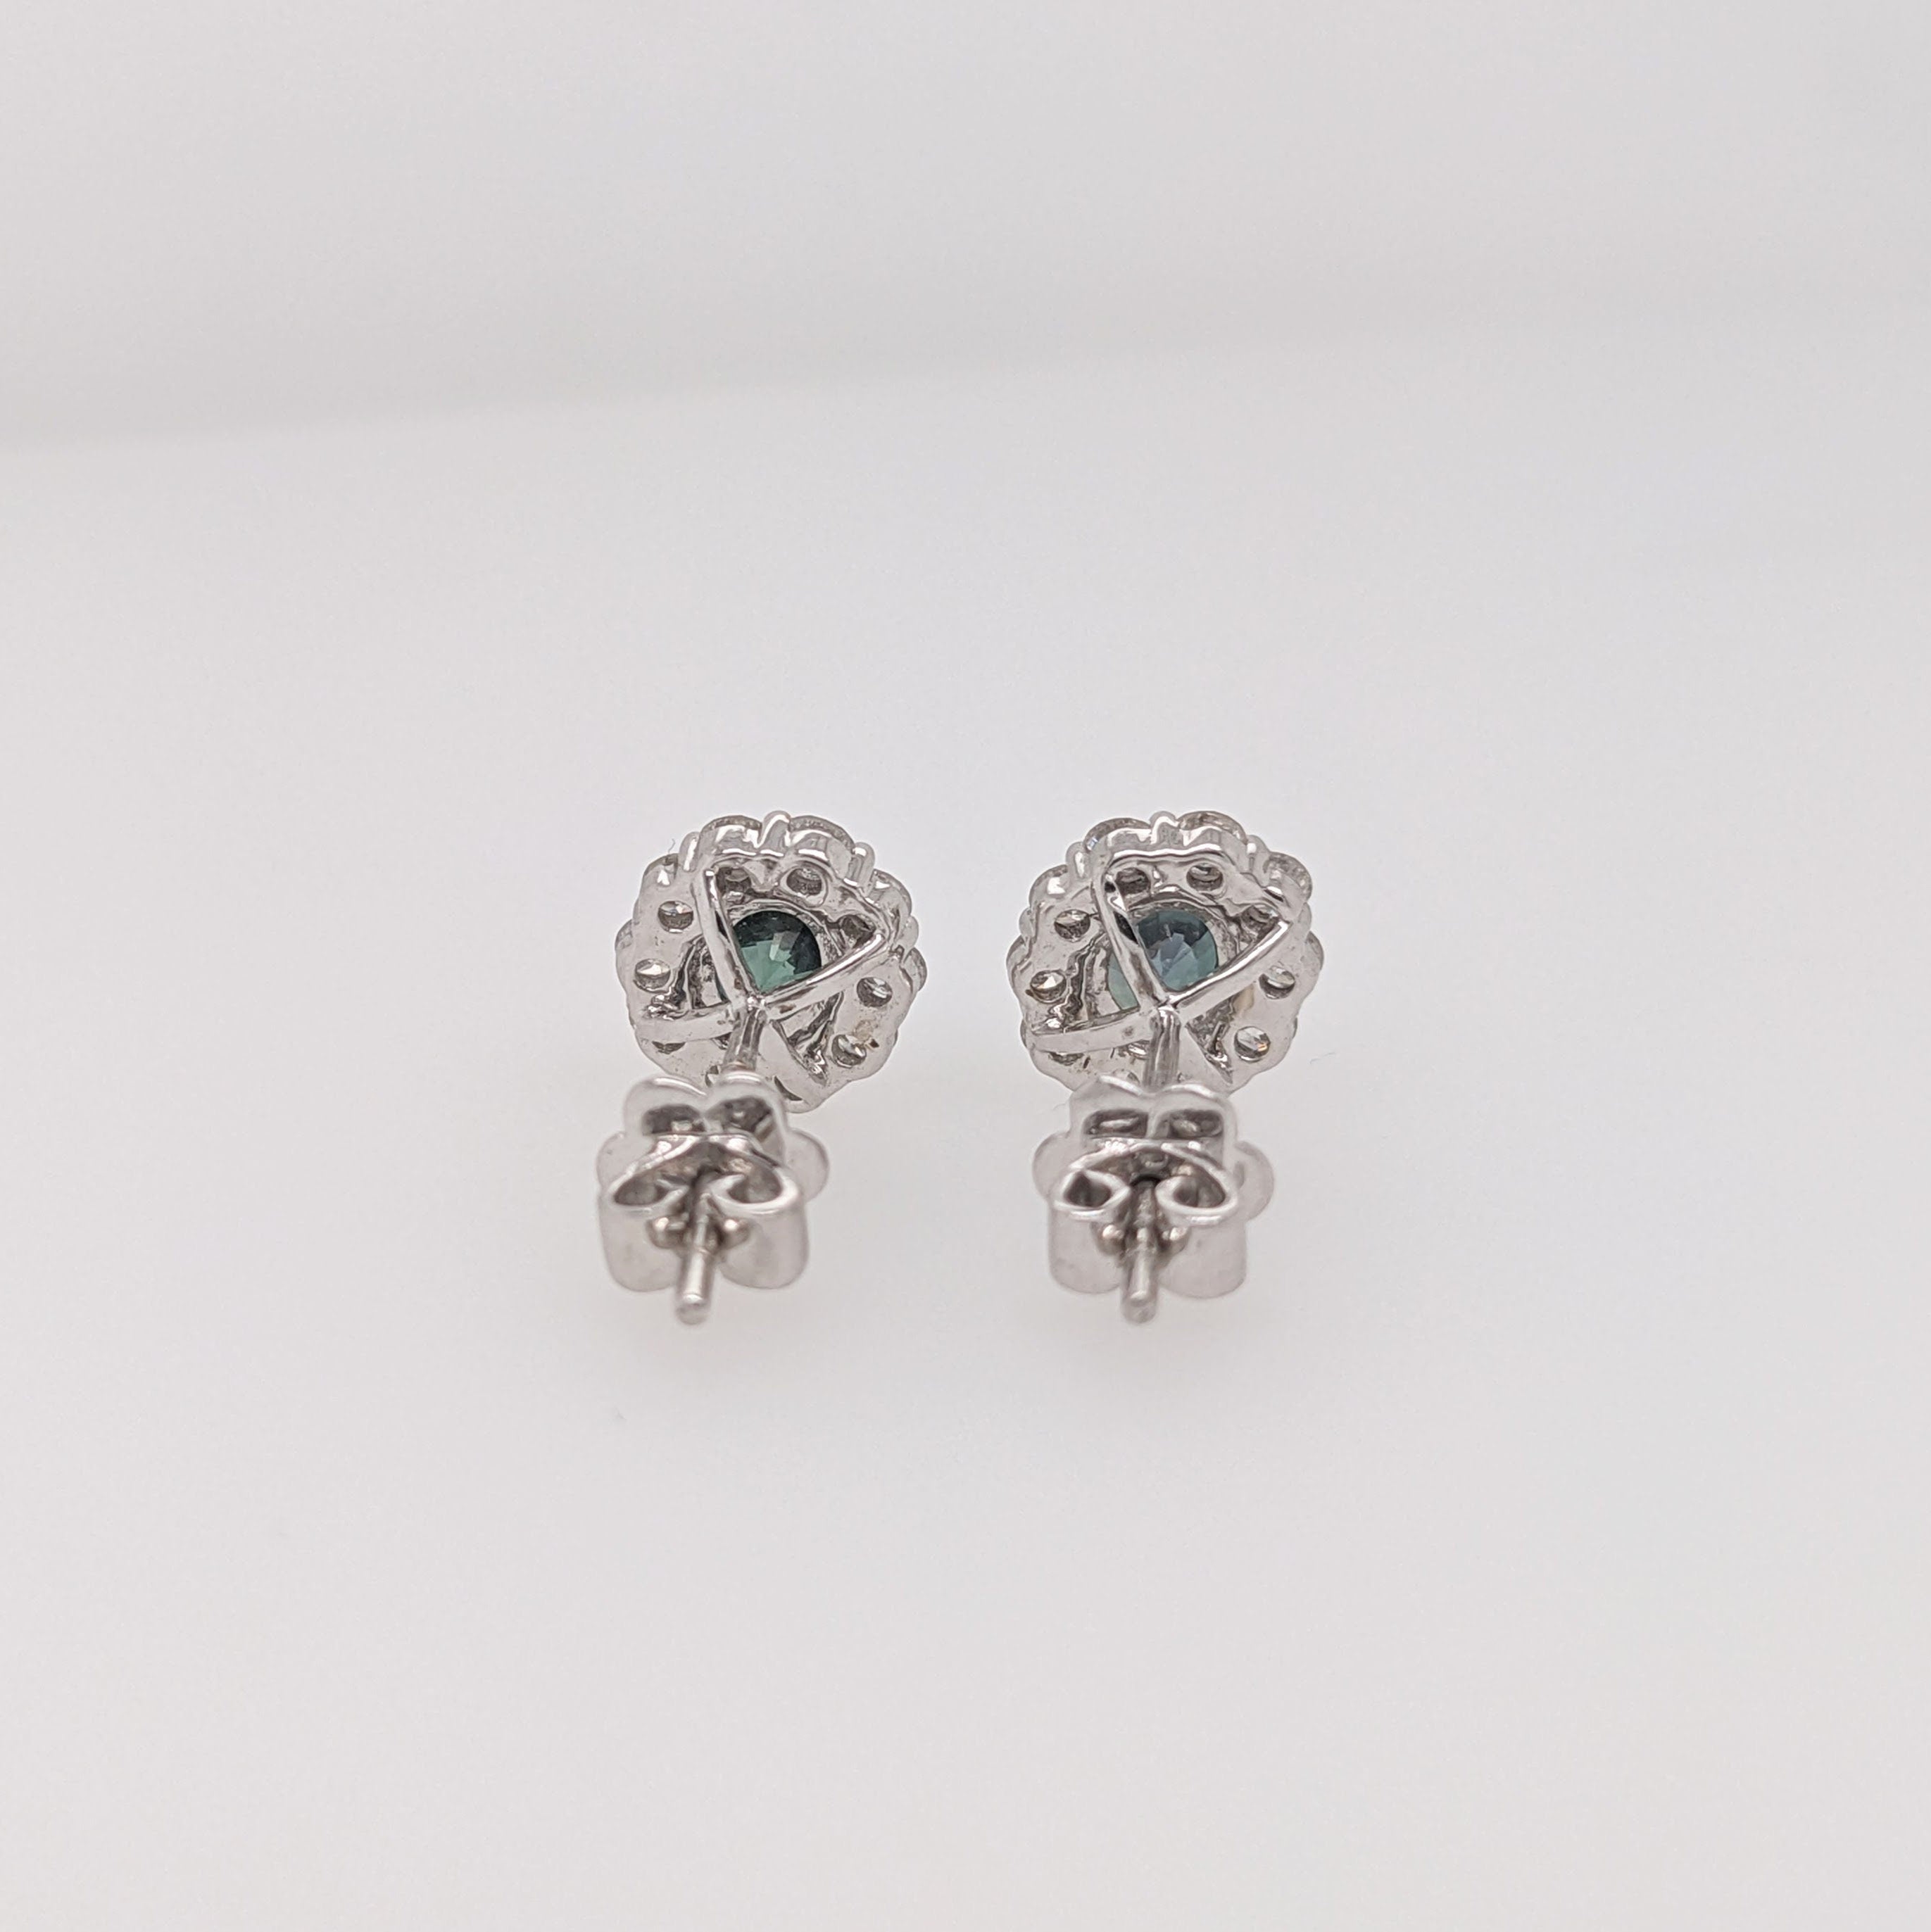 Alexandrite Studs in Solid 14K White Gold with a Natural Diamond Halo | Oval 5x4mm | Natural Color Change Gemstone | June Birthstone